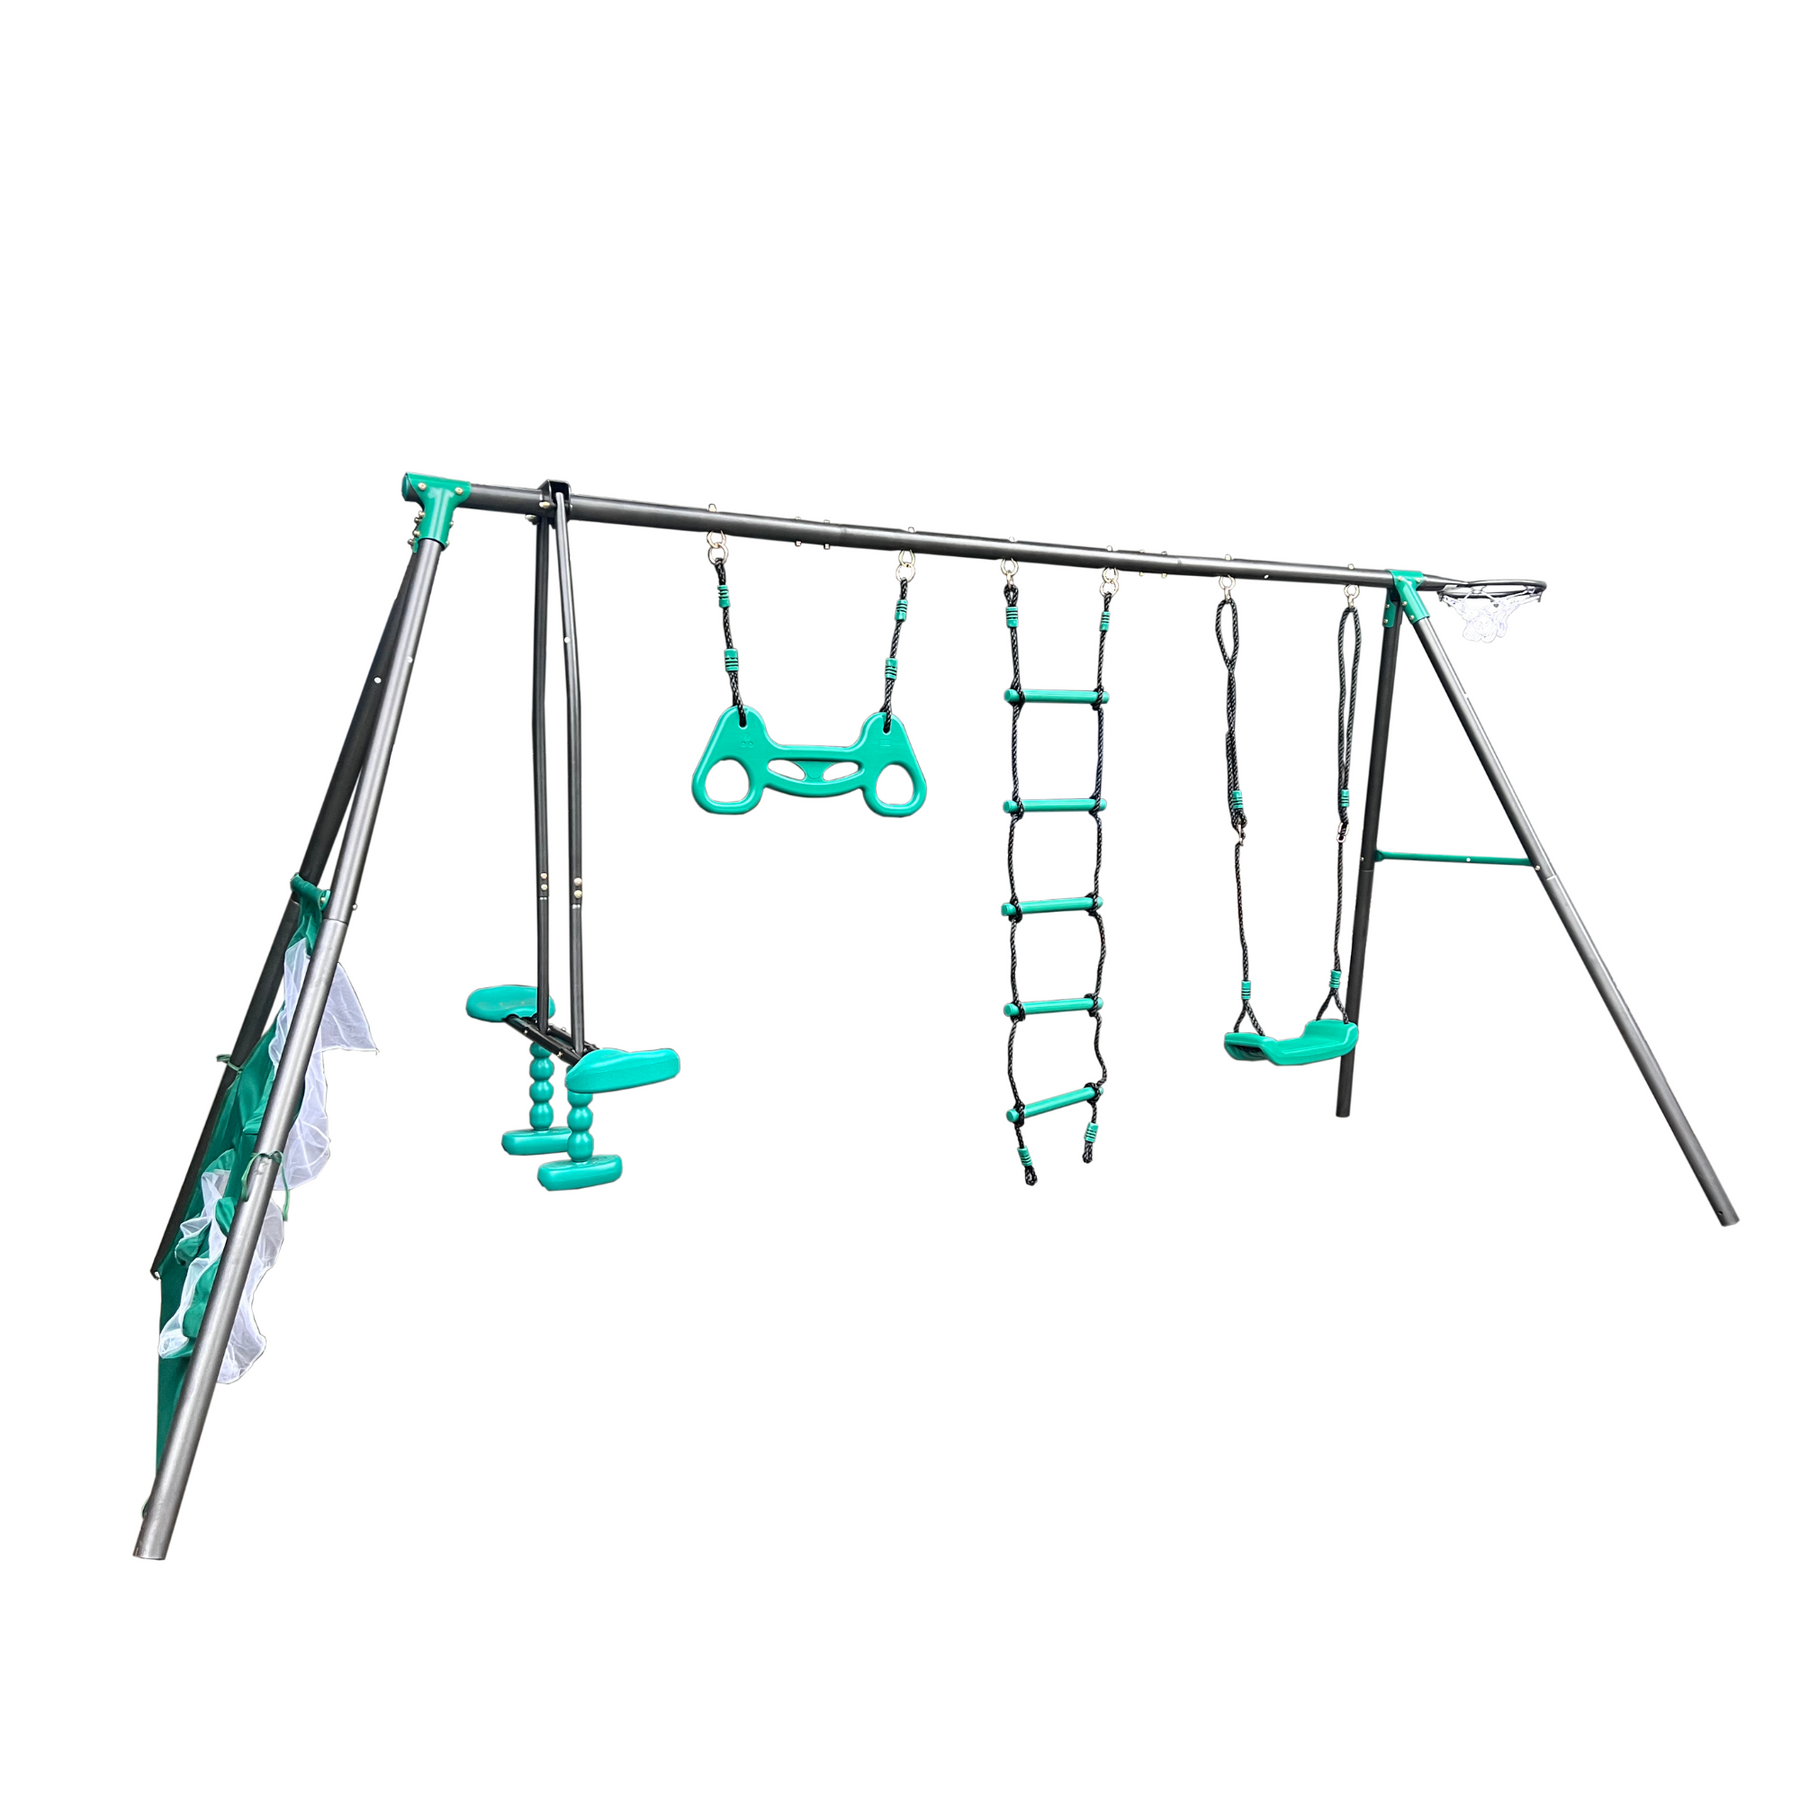 XNS076 blackish green interesting four function swingset with face to face metal plastic safe swing seat 550lbs for outdoor playground for age 3+ - Tonkn